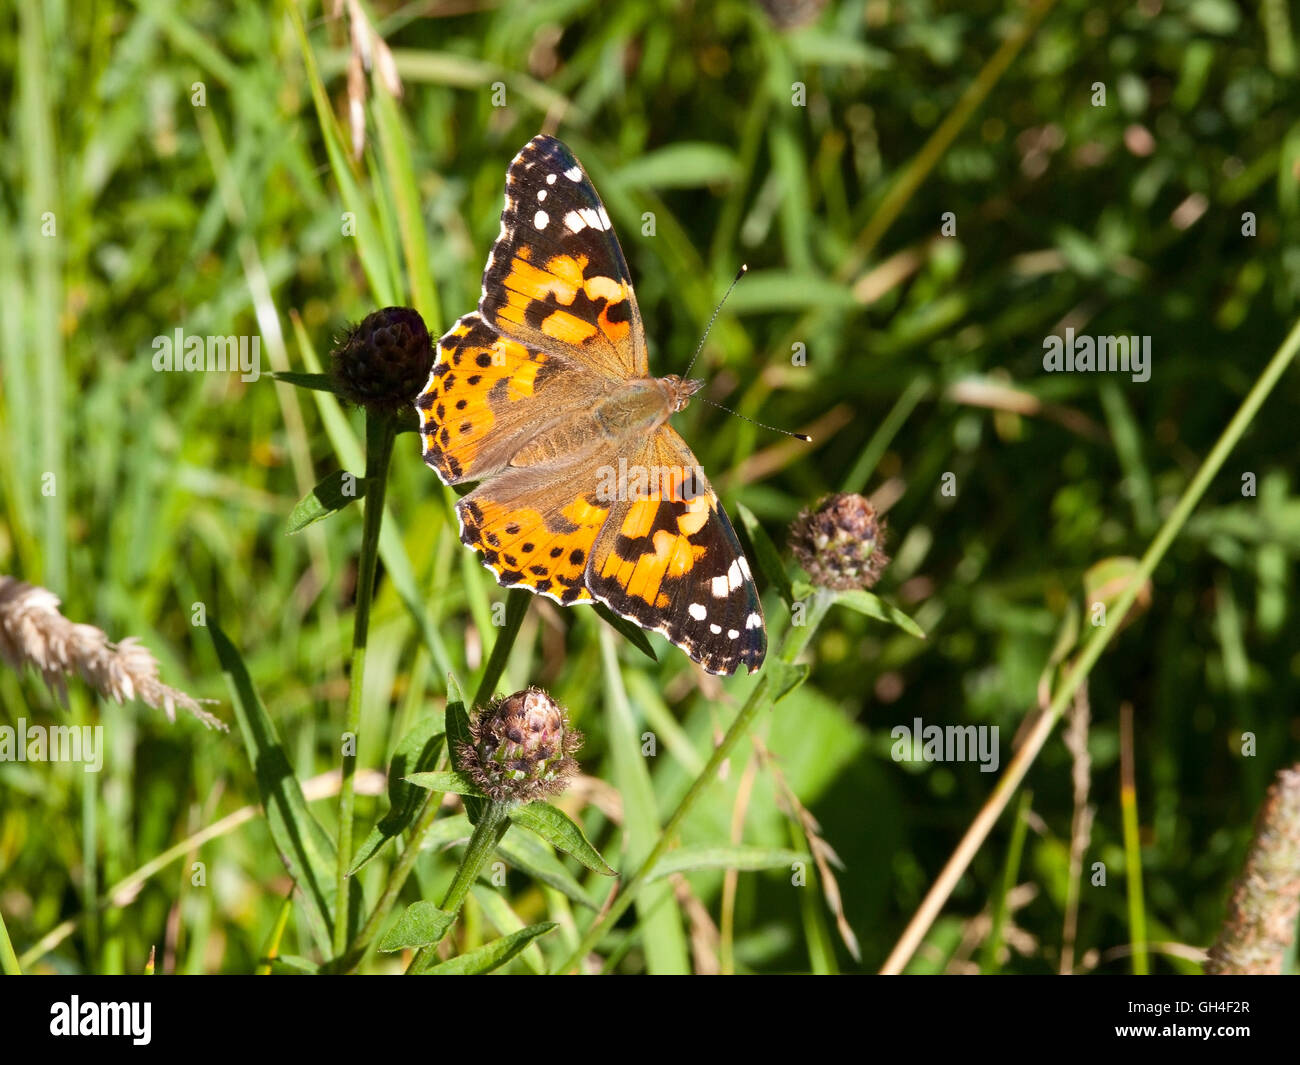 A painted lady butterfly, Cynthia cardui, feeding on the purple flowers of a knapweed plant in summertime. Stock Photo